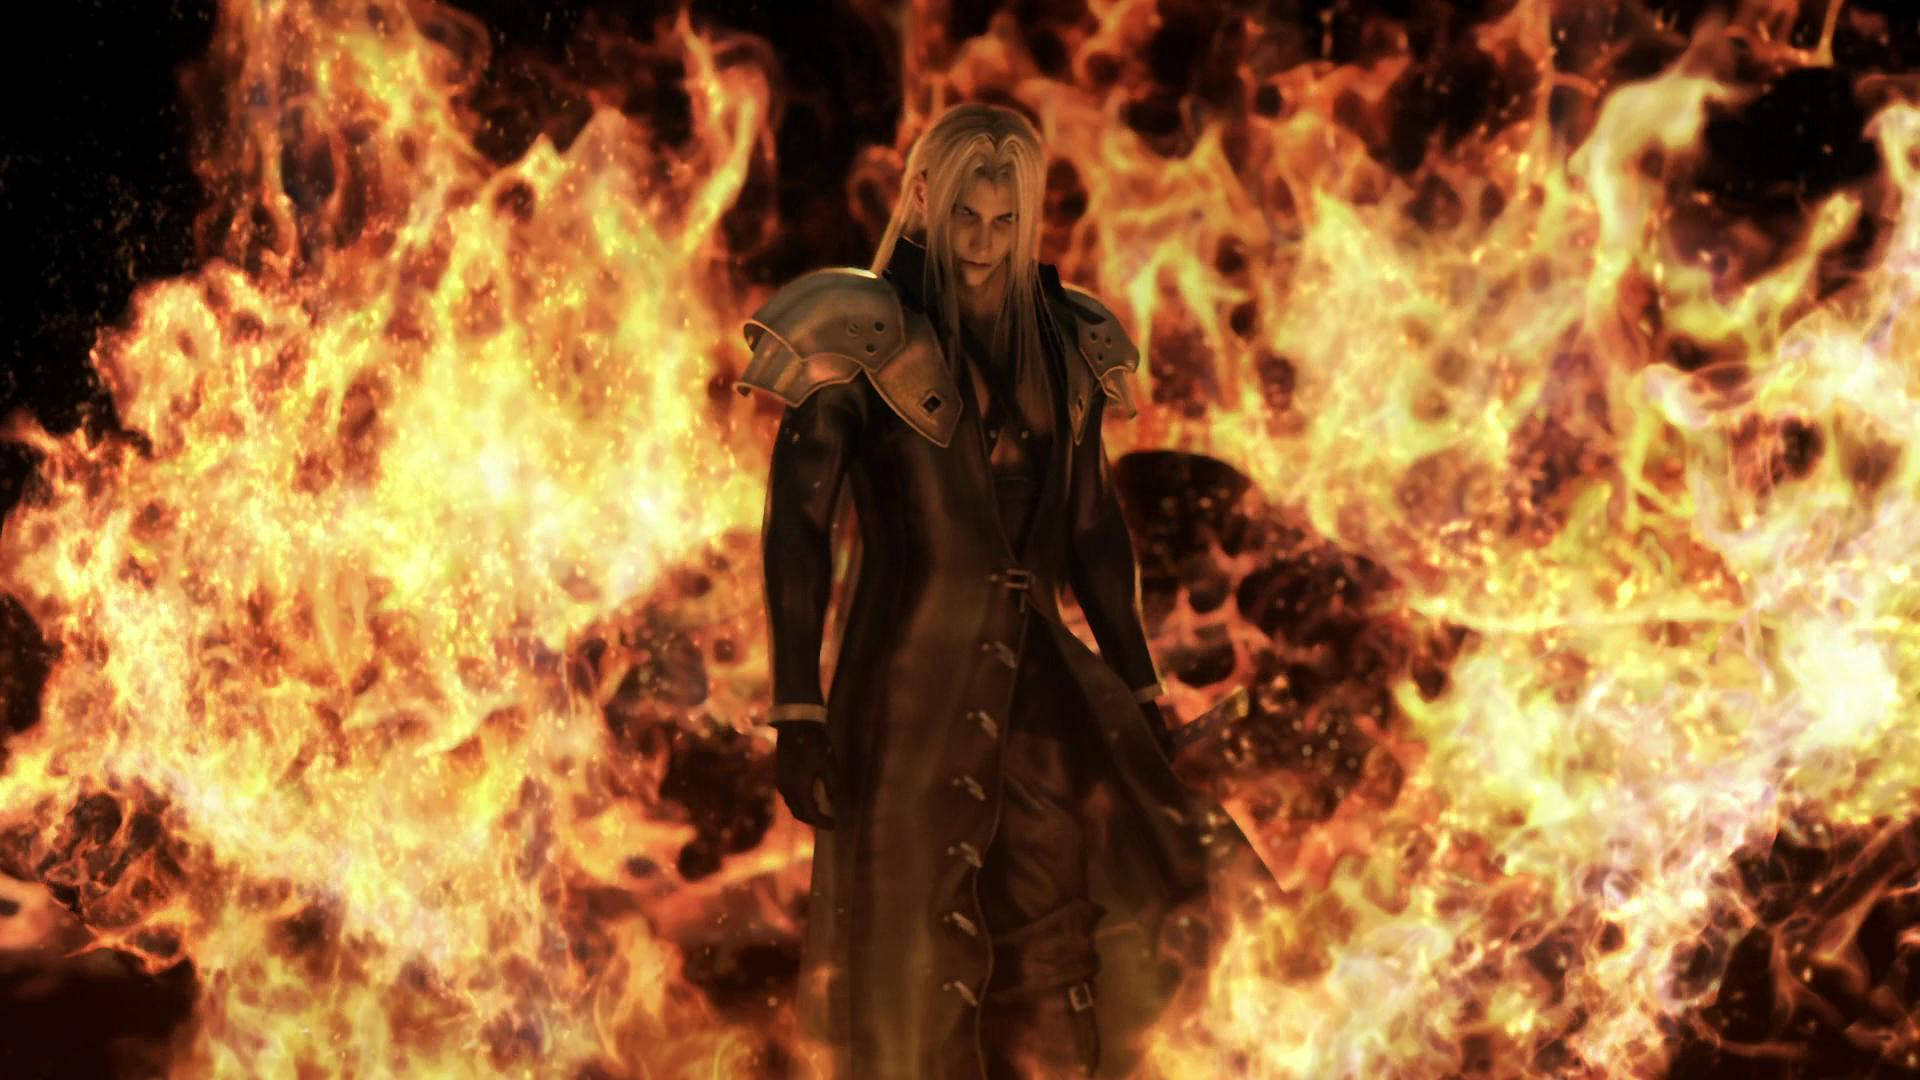 Sephiroth In Blazing Fire Background